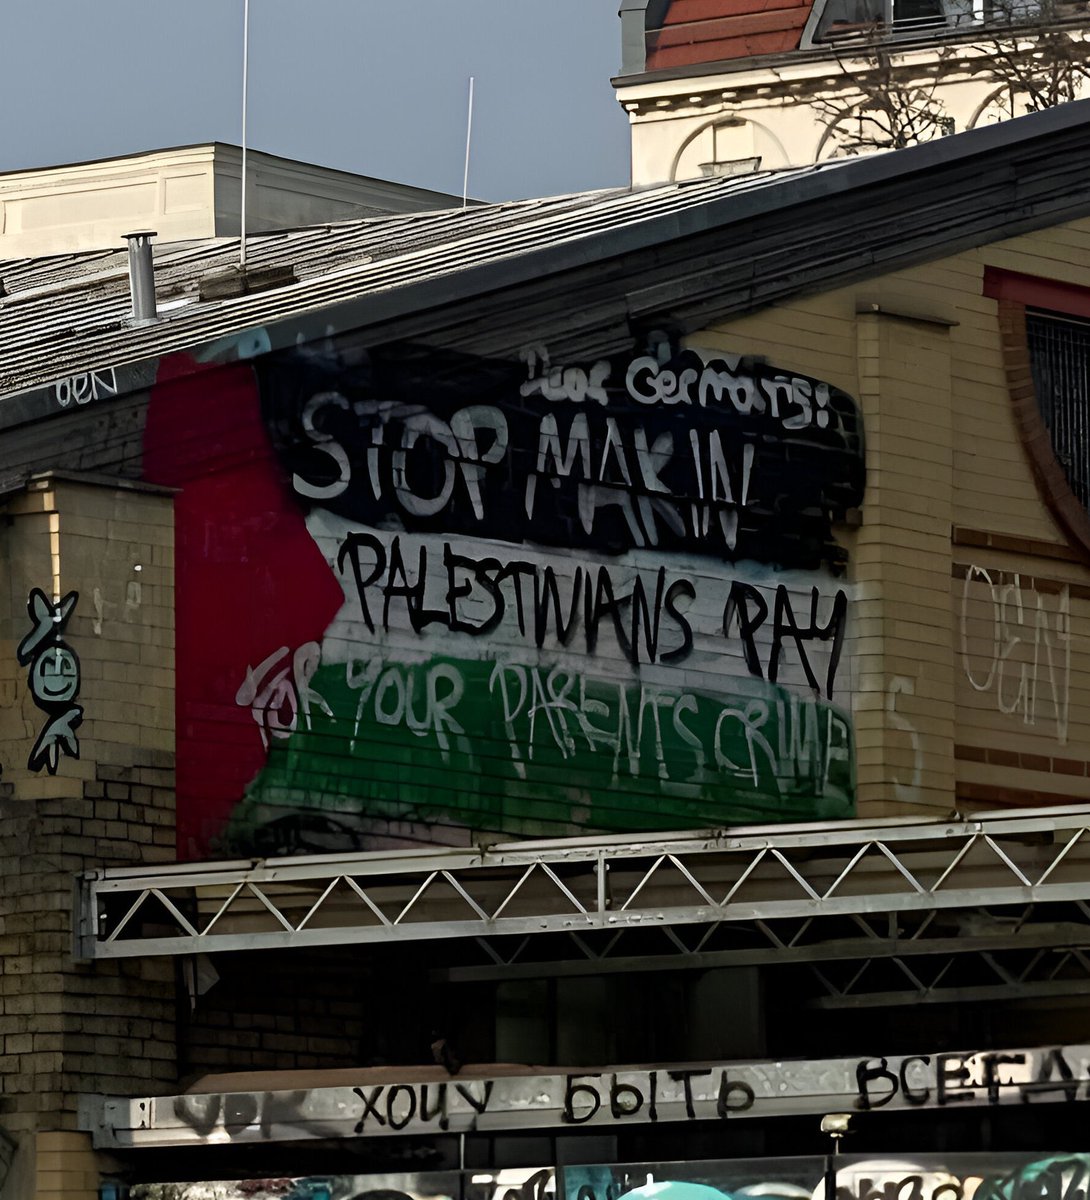 “Dear Germans, stop making Palestinians pay for your parents crimes.” Spotted in Berlin, Germany